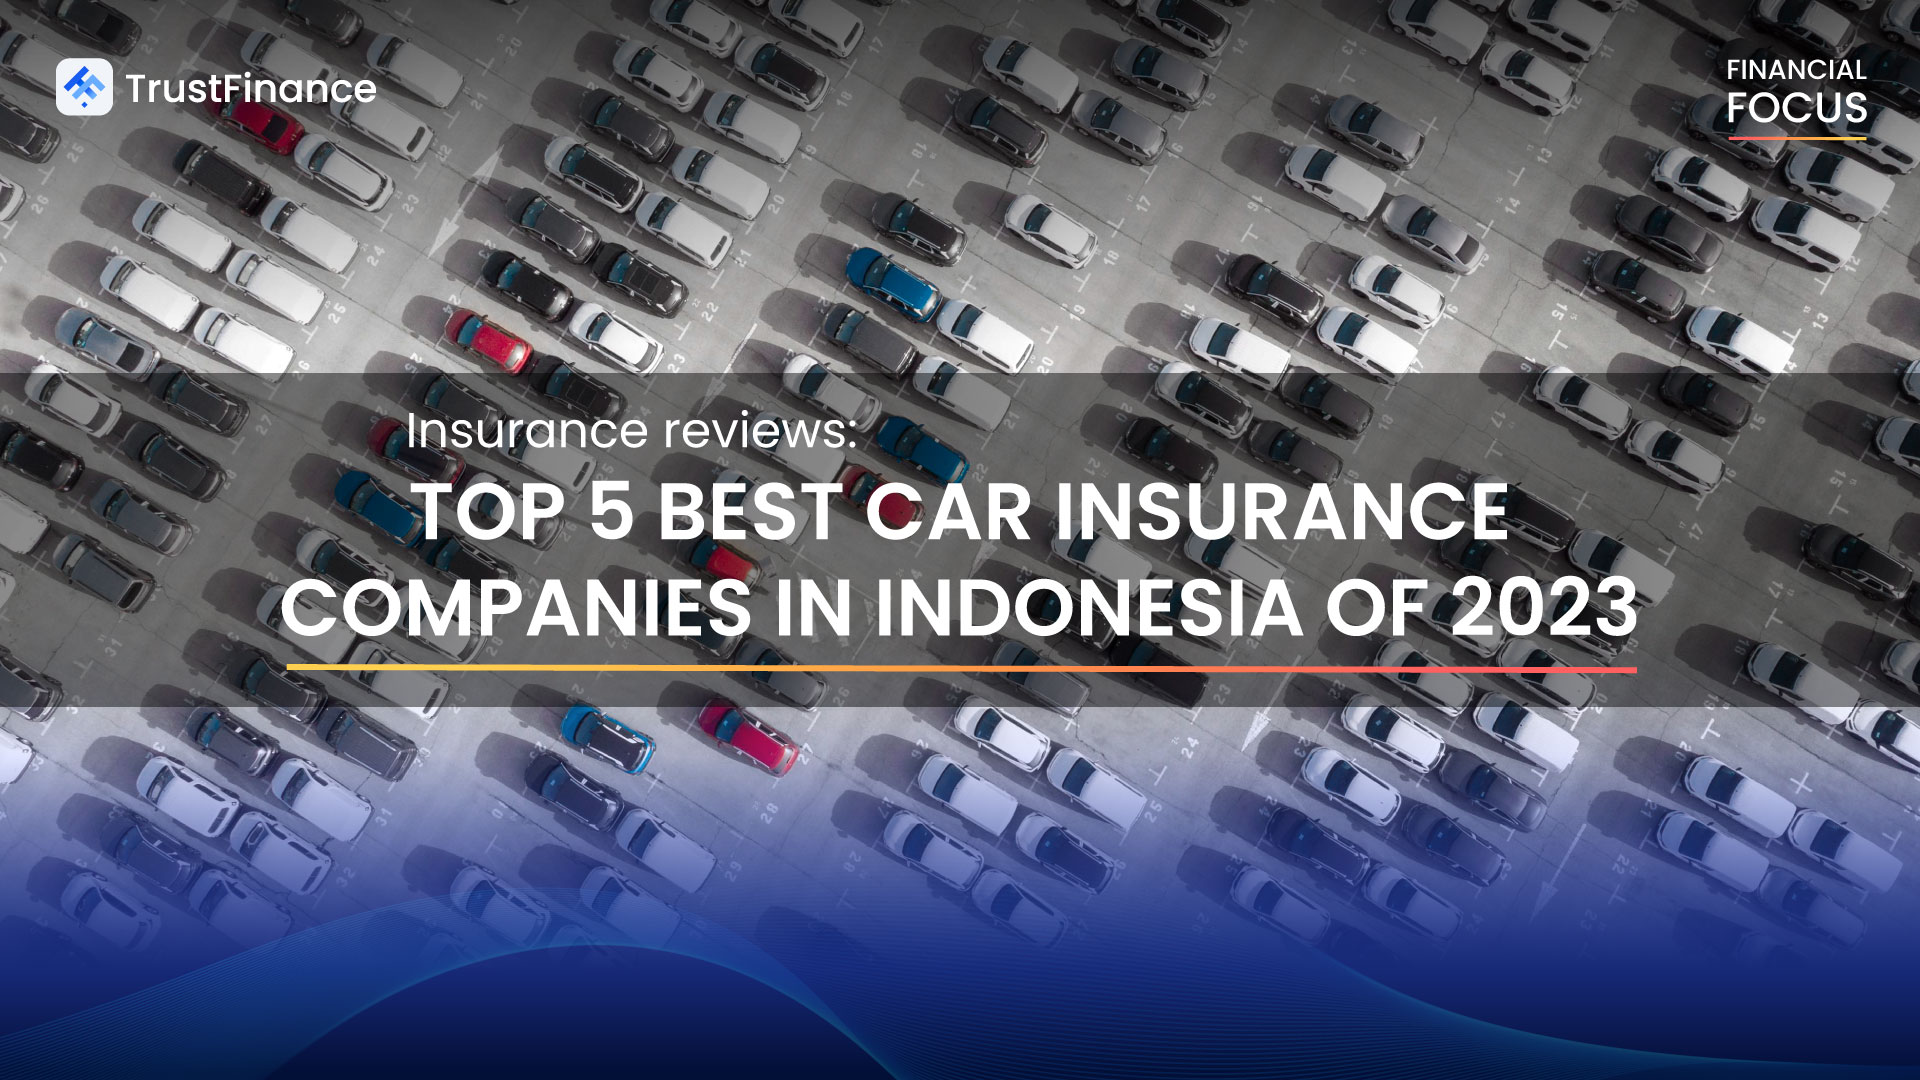 Insurance review: Top 5 Best Car Insurance Companies in Indonesia of 2023